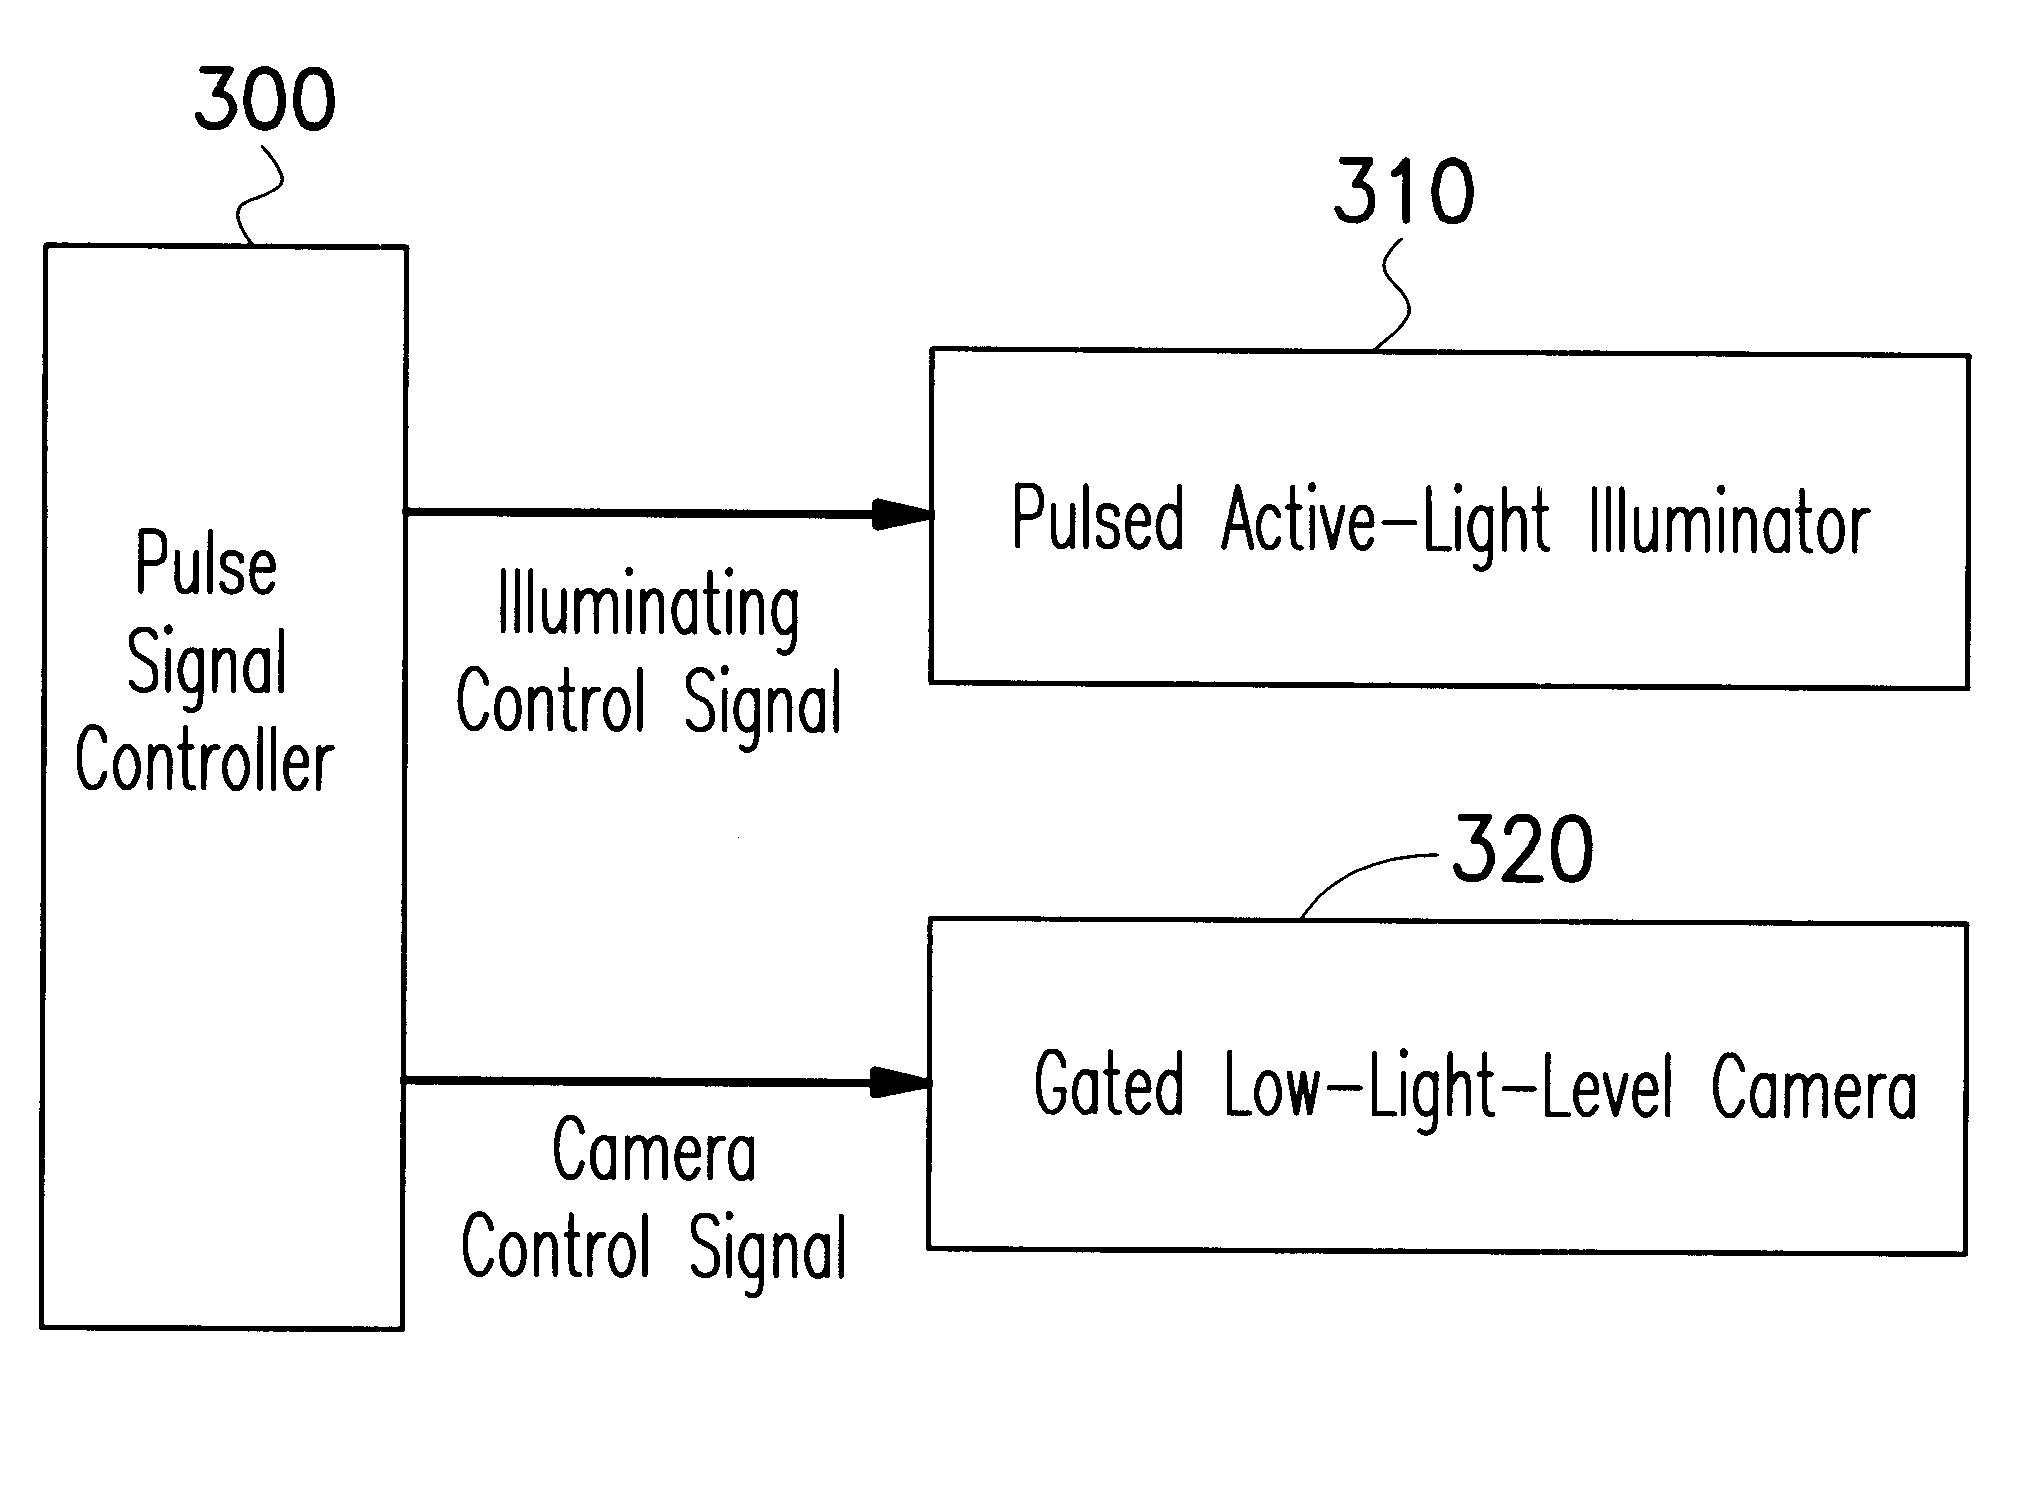 Method for controlling a light source in a night vision surveillance system